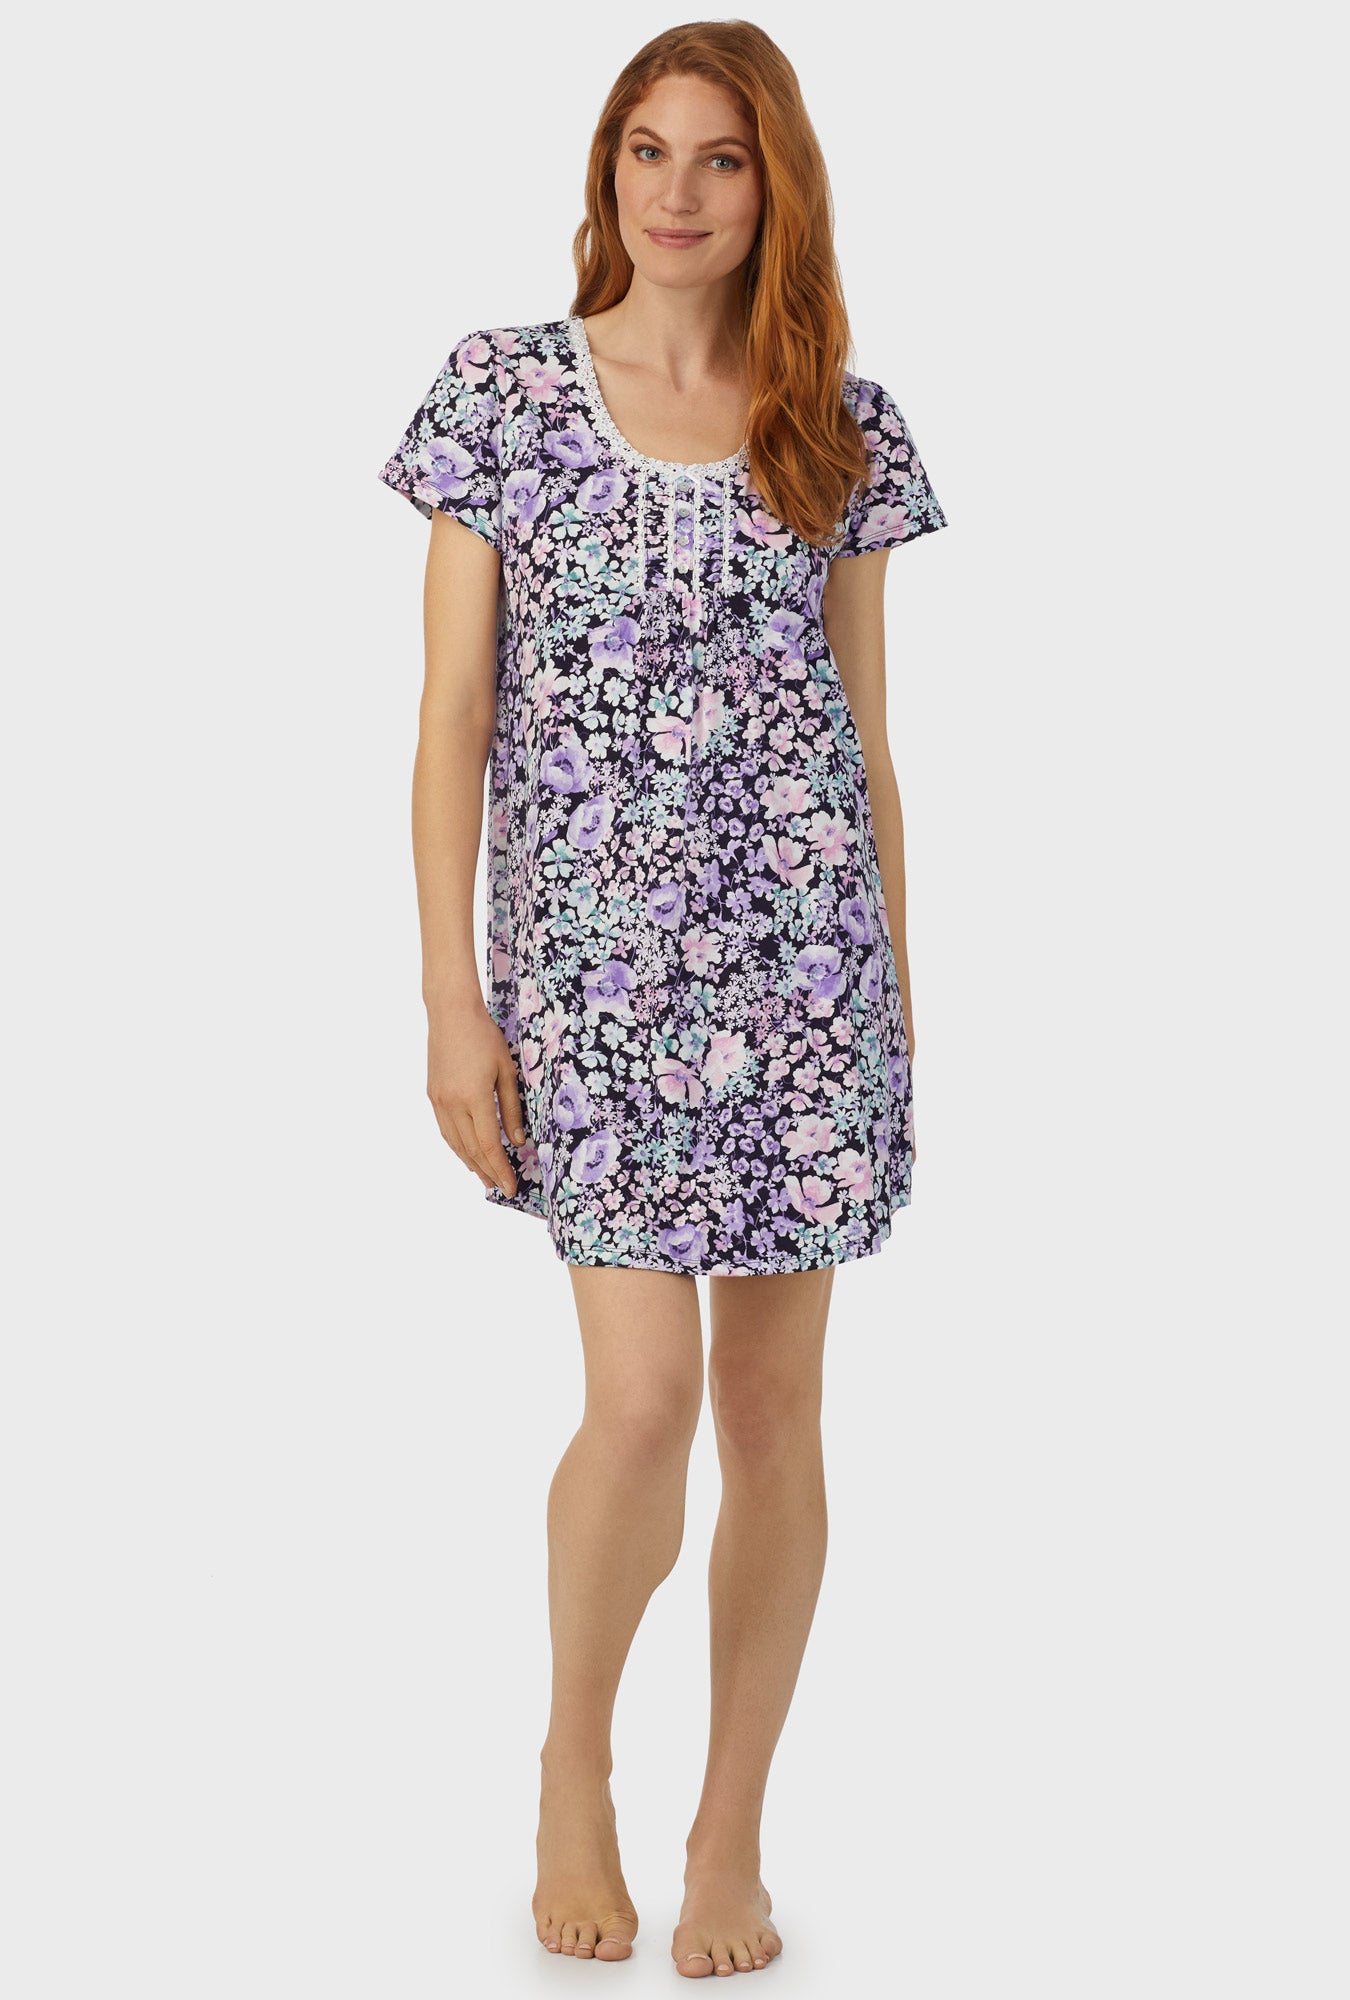 A lady wearing navy floral cap sleeve nightshirt with midnight blue floral print.